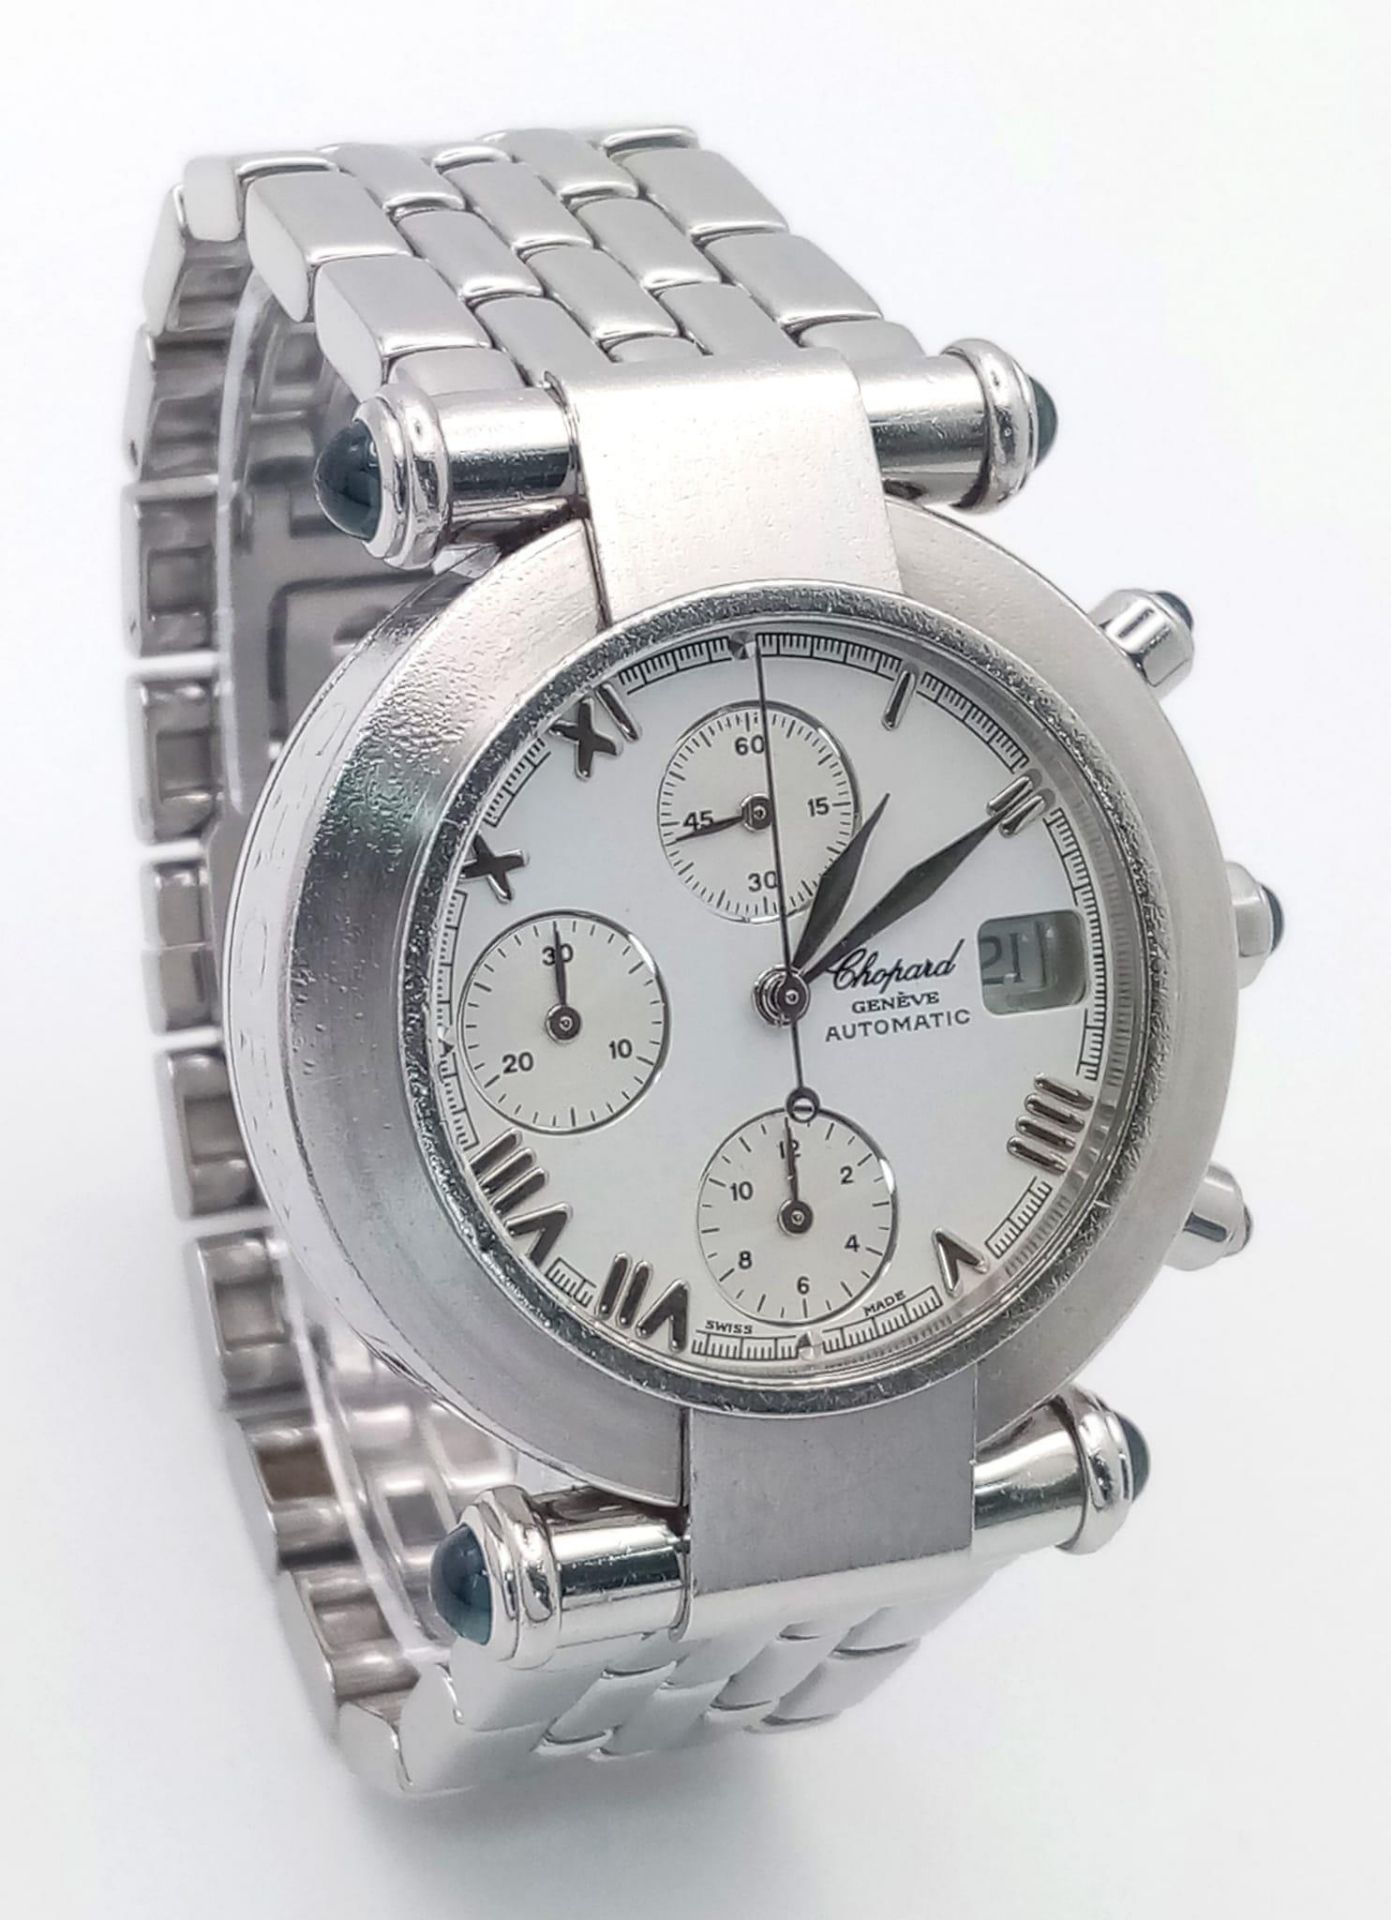 A Chopard Automatic Chronograph Gents Watch. Stainless steel bracelet and case - 37mm. White dial - Bild 3 aus 8